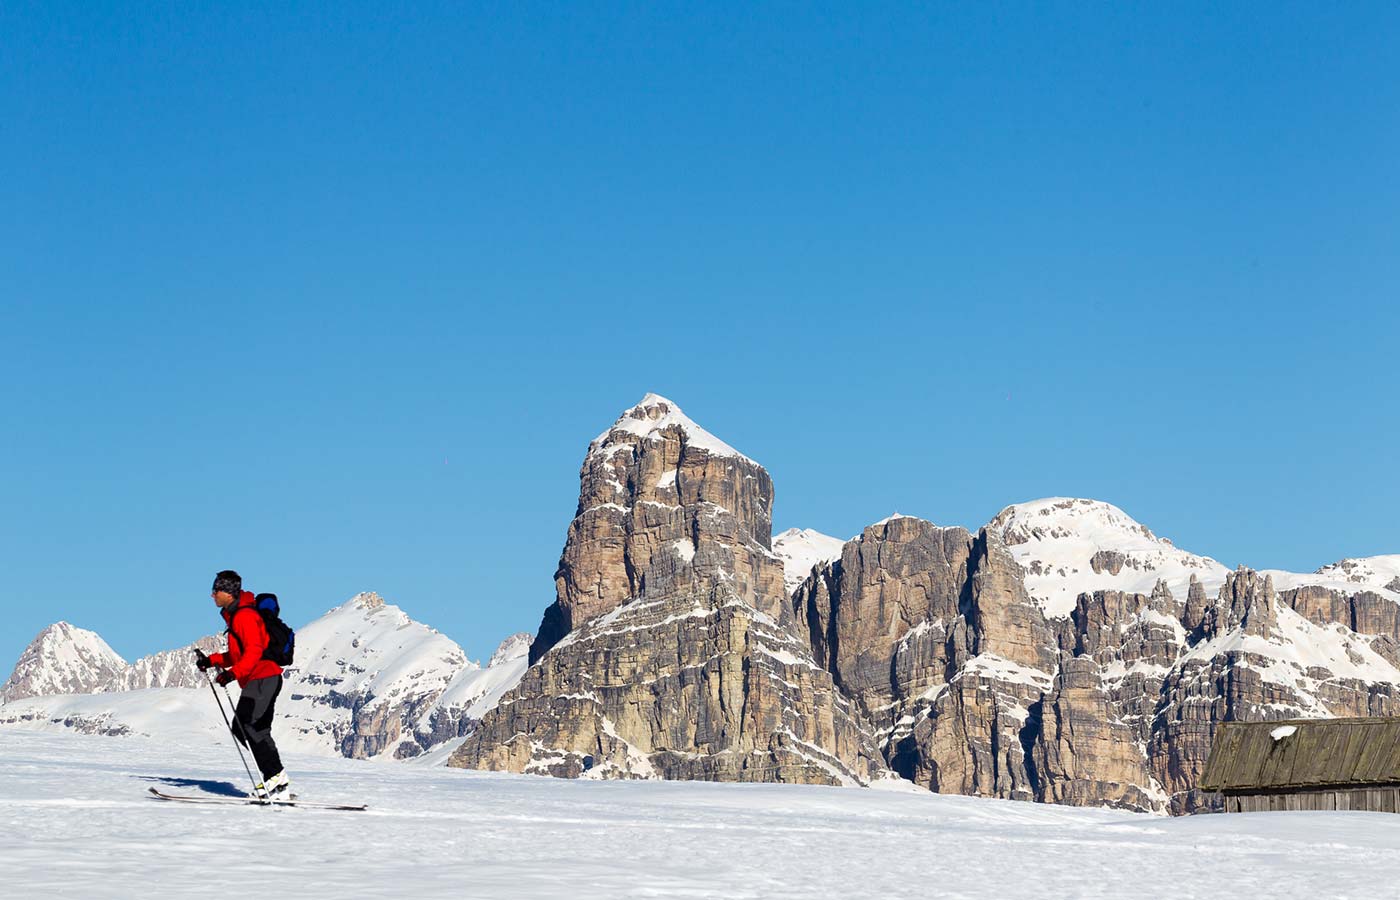 Ski tour with Dolomites at the back